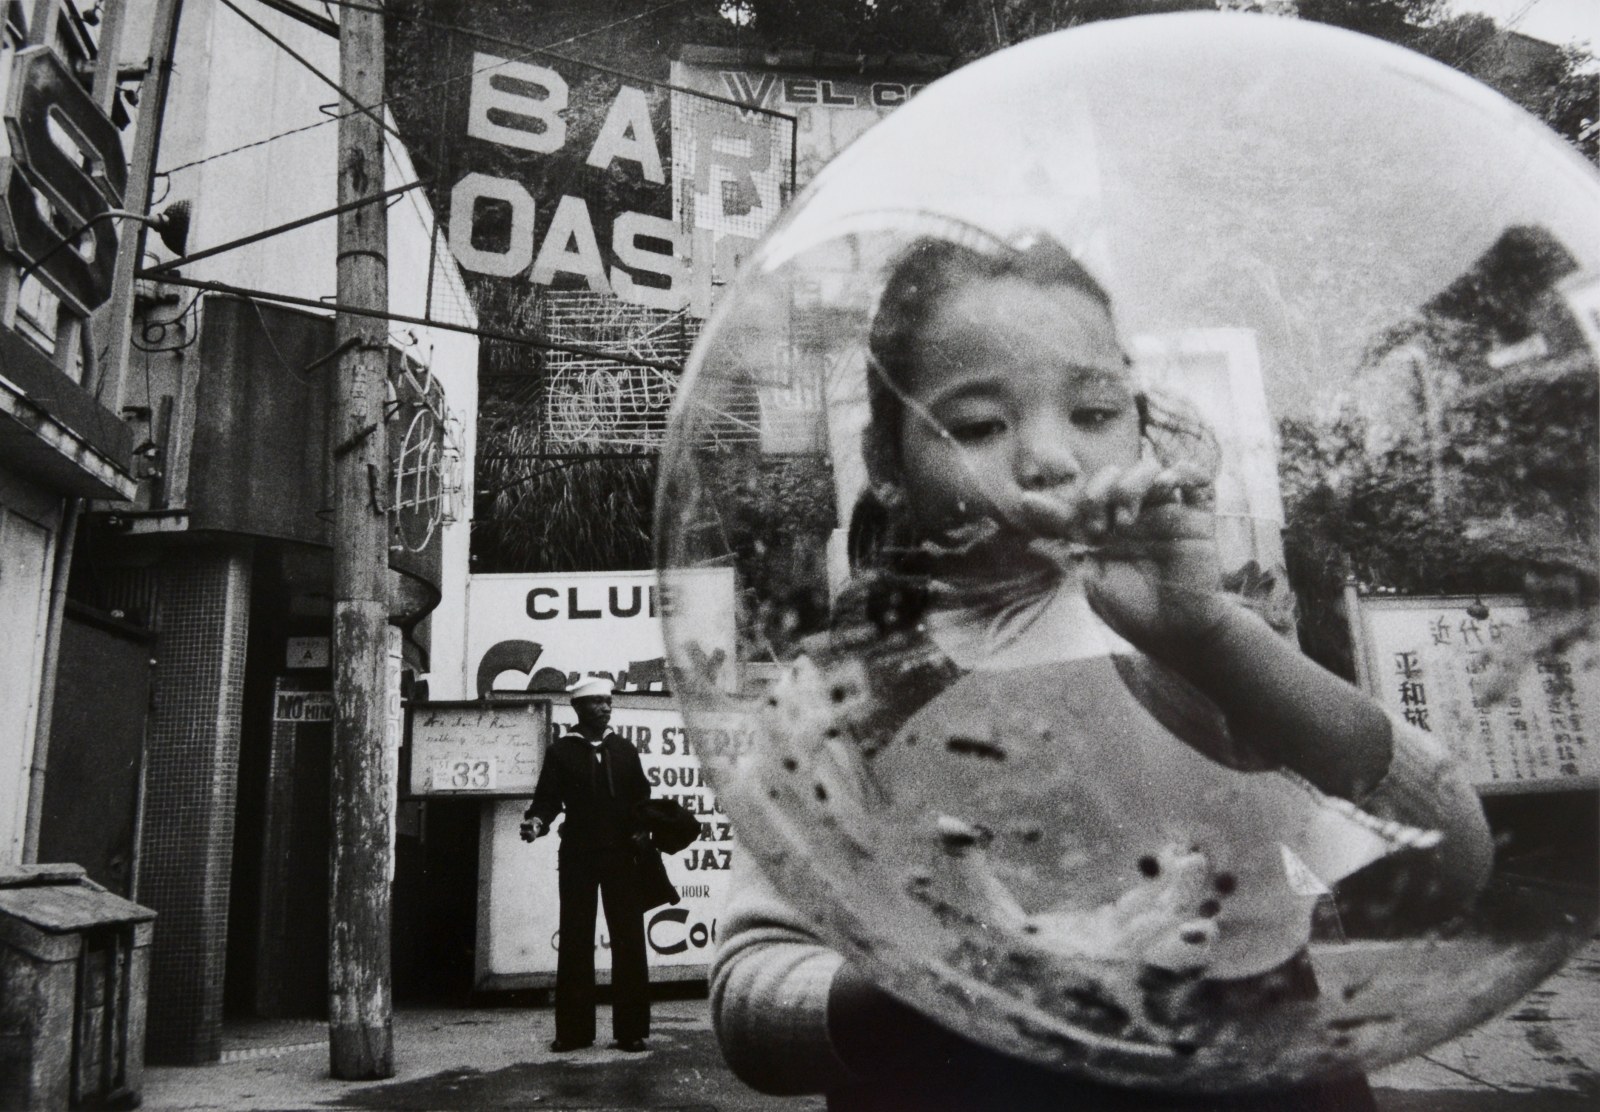 A child blows up a large, clear balloon and a sailor stands in the distance against a wall in a black and white photo